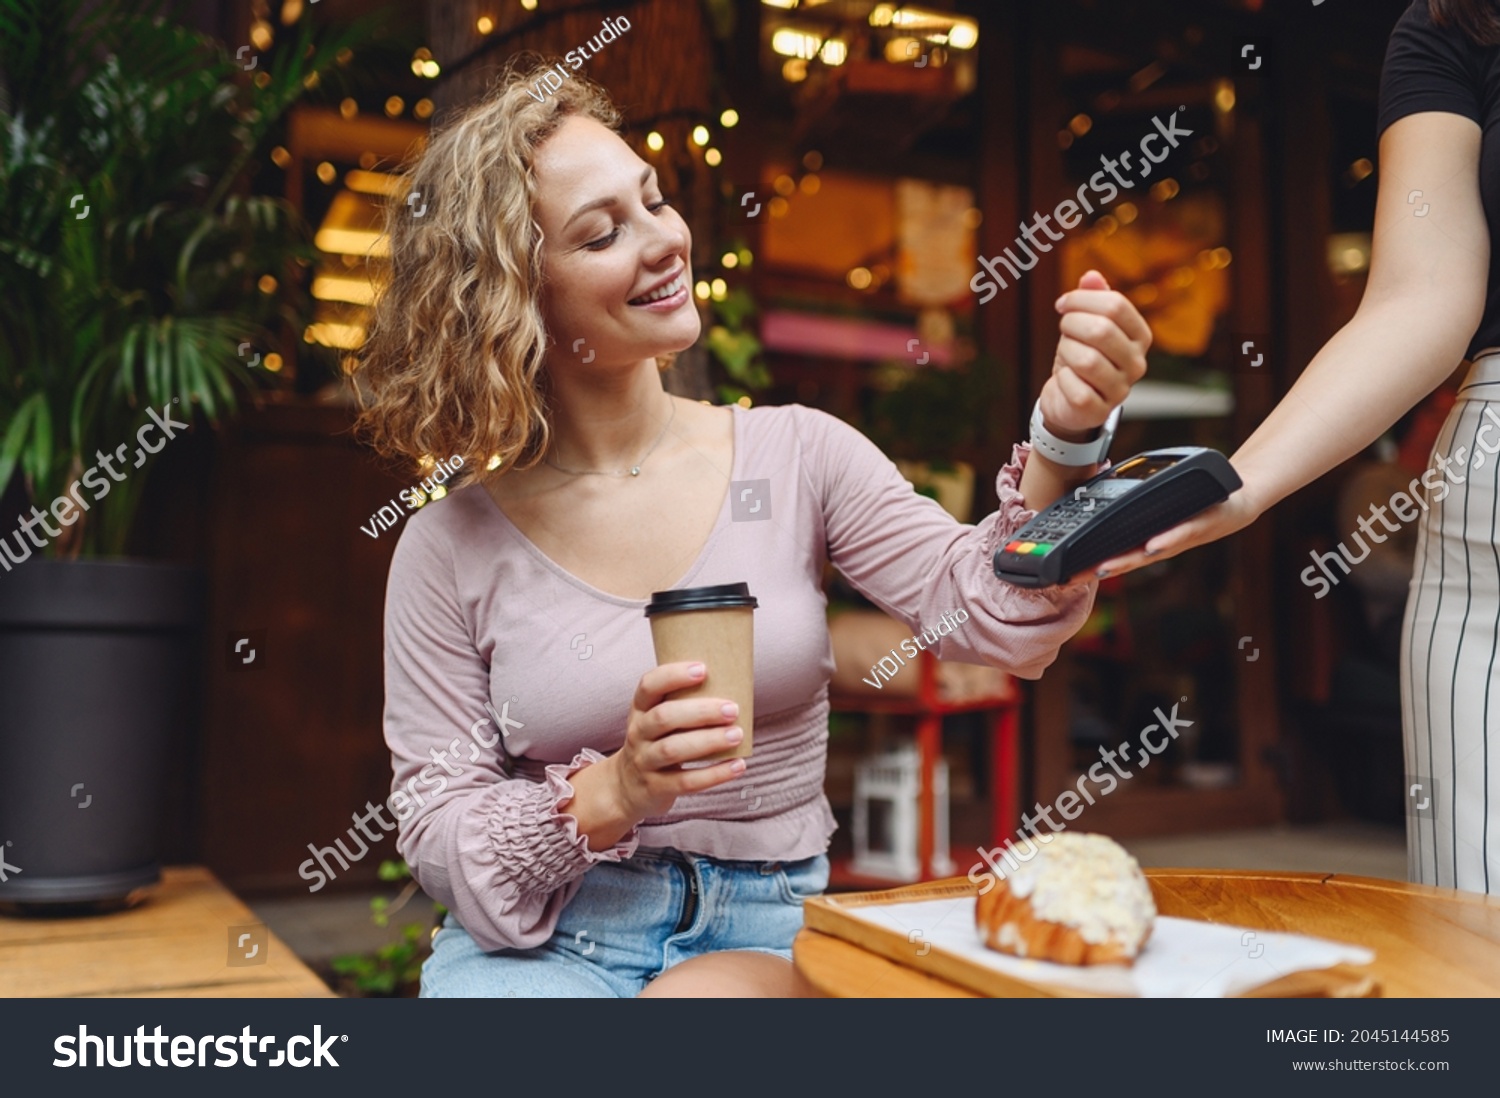 Young woman in casual clothes at cafe buy breakfast sit at table hold wireless bank payment terminal smart watch to process acquire payments drink coffee relax in restaurant during free time indoors. #2045144585